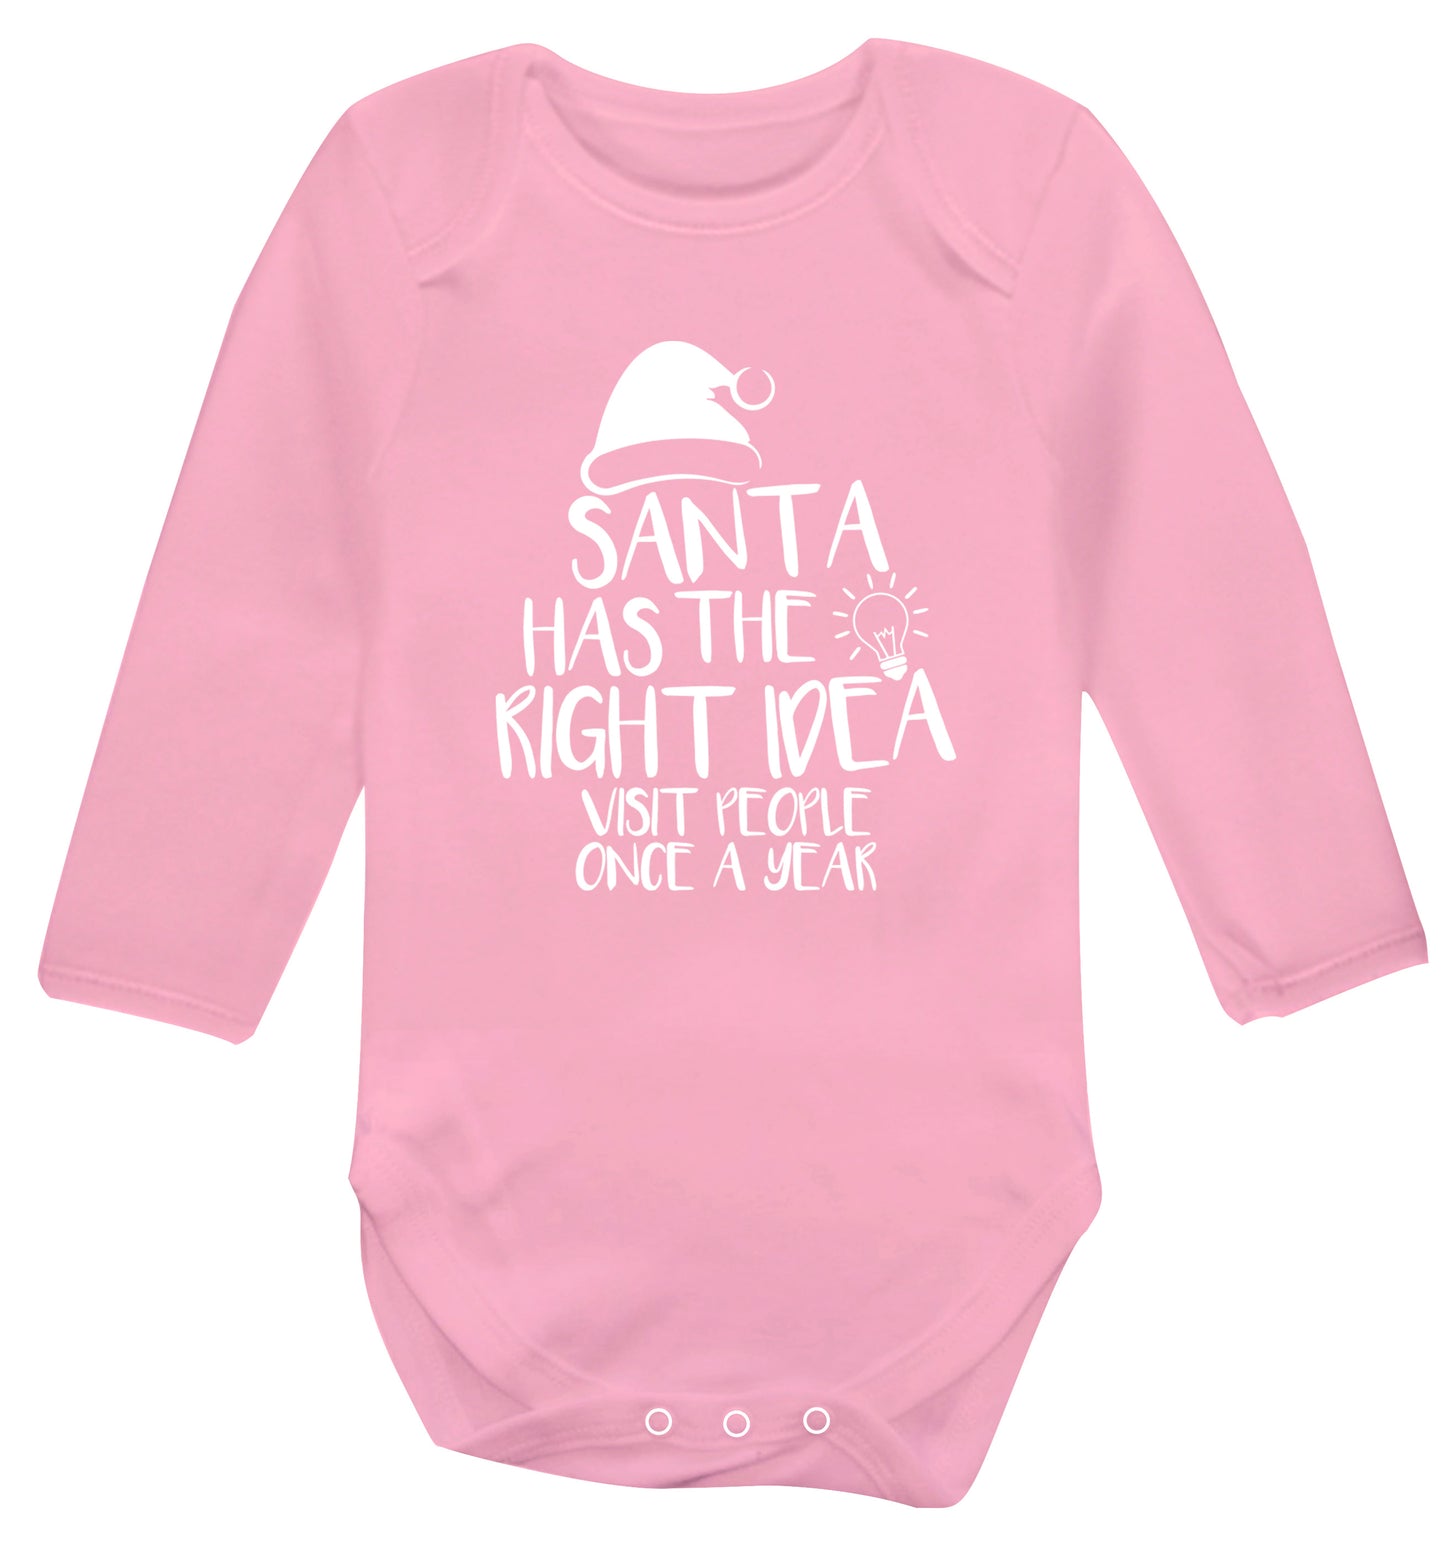 Santa has the right idea visit people once a year Baby Vest long sleeved pale pink 6-12 months